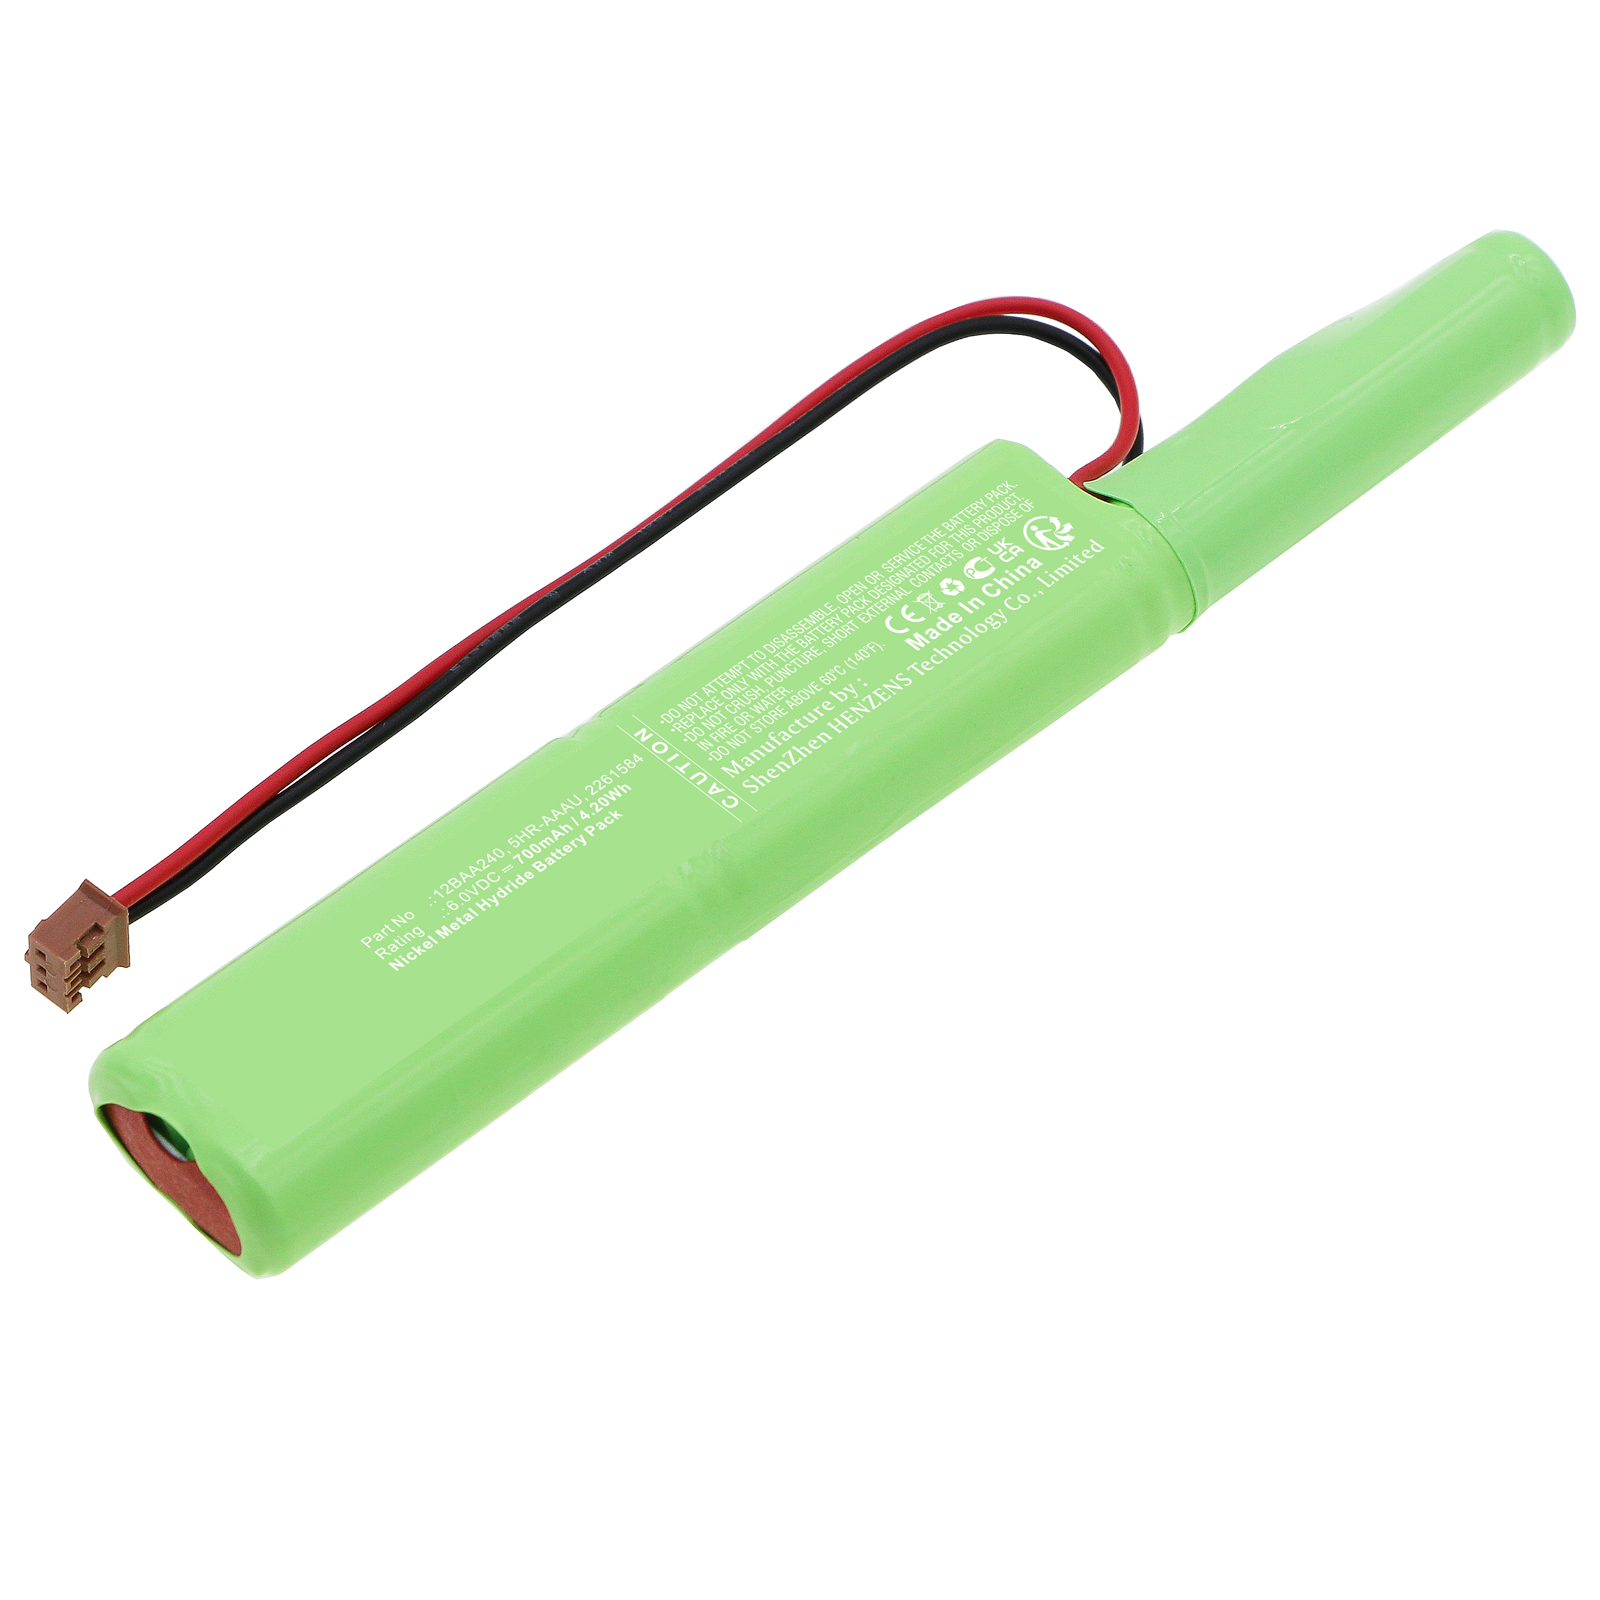 Synergy Digital Equipment Battery, Compatible with Mitutoyo 12BAA240 Equipment Battery (Ni-MH, 6V, 700mAh)